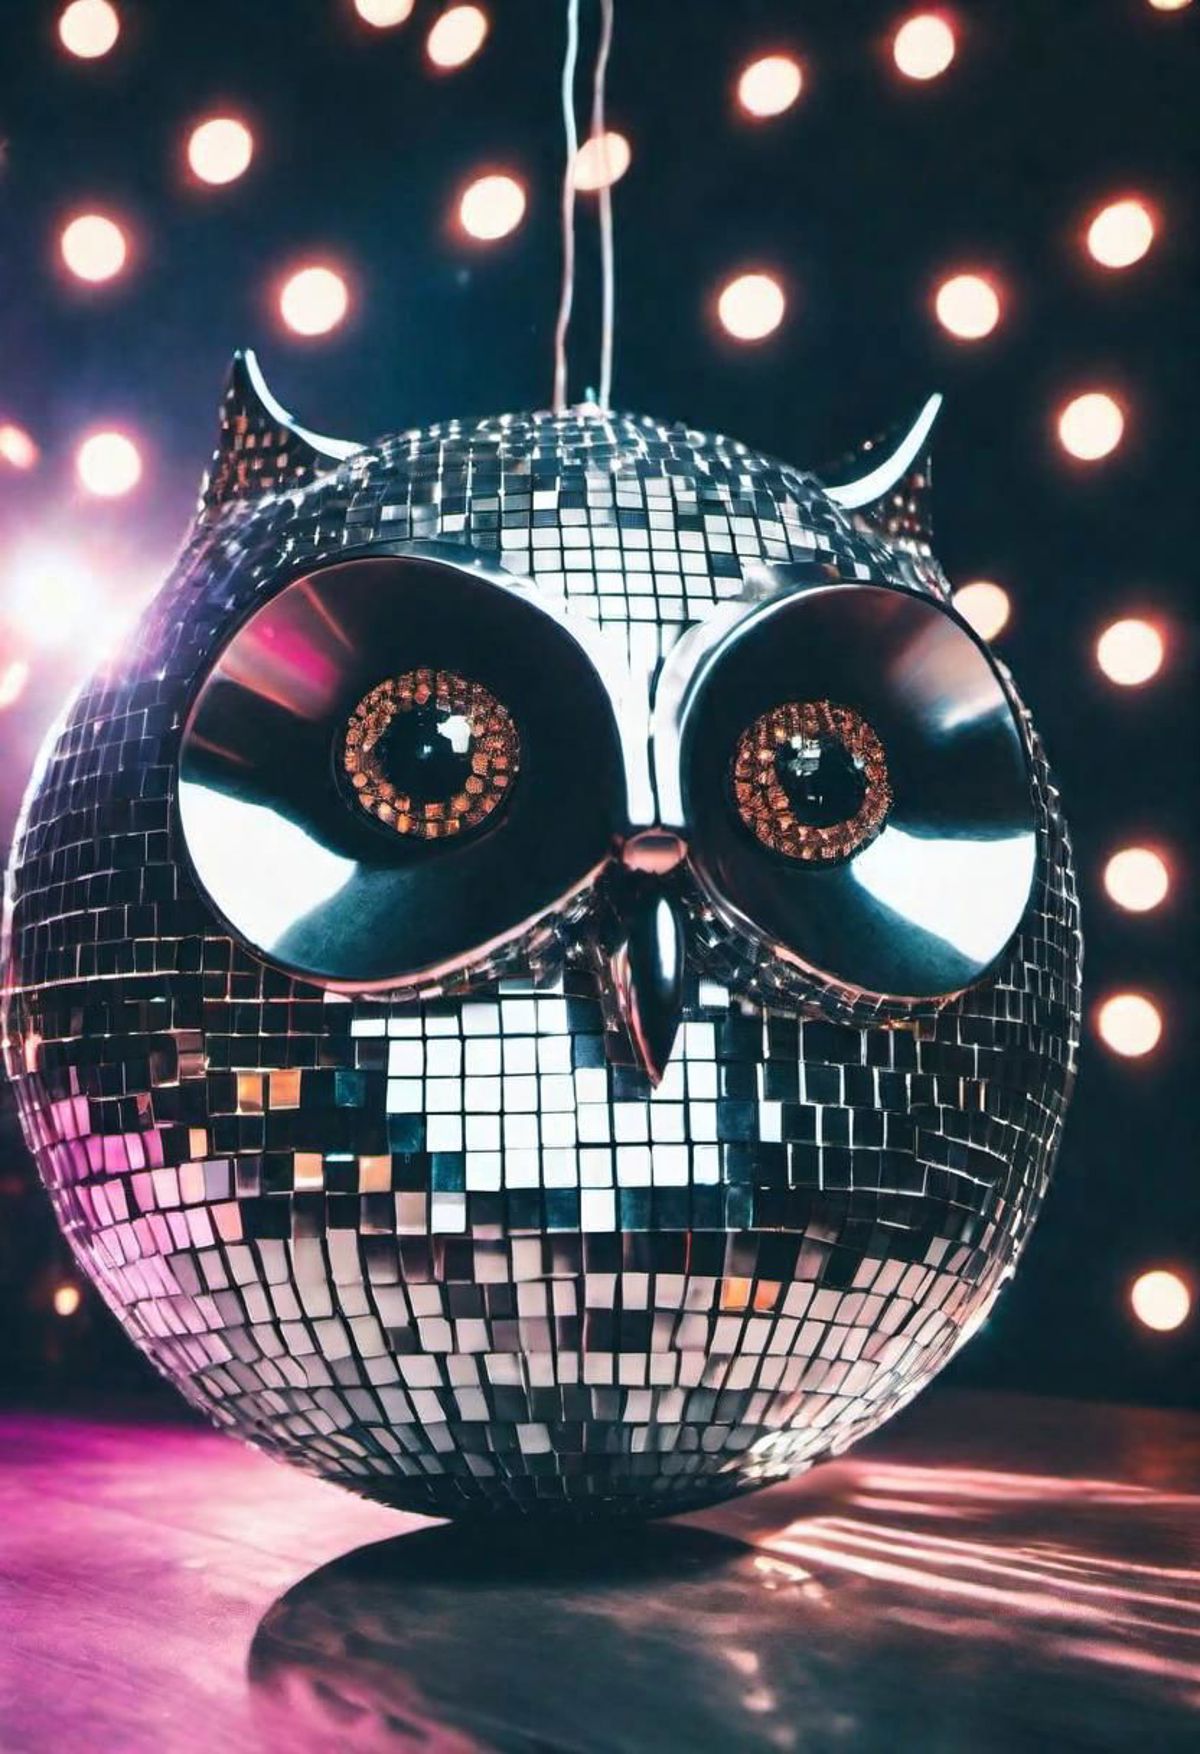 A shiny disco ball with an owl design and lights in the background.